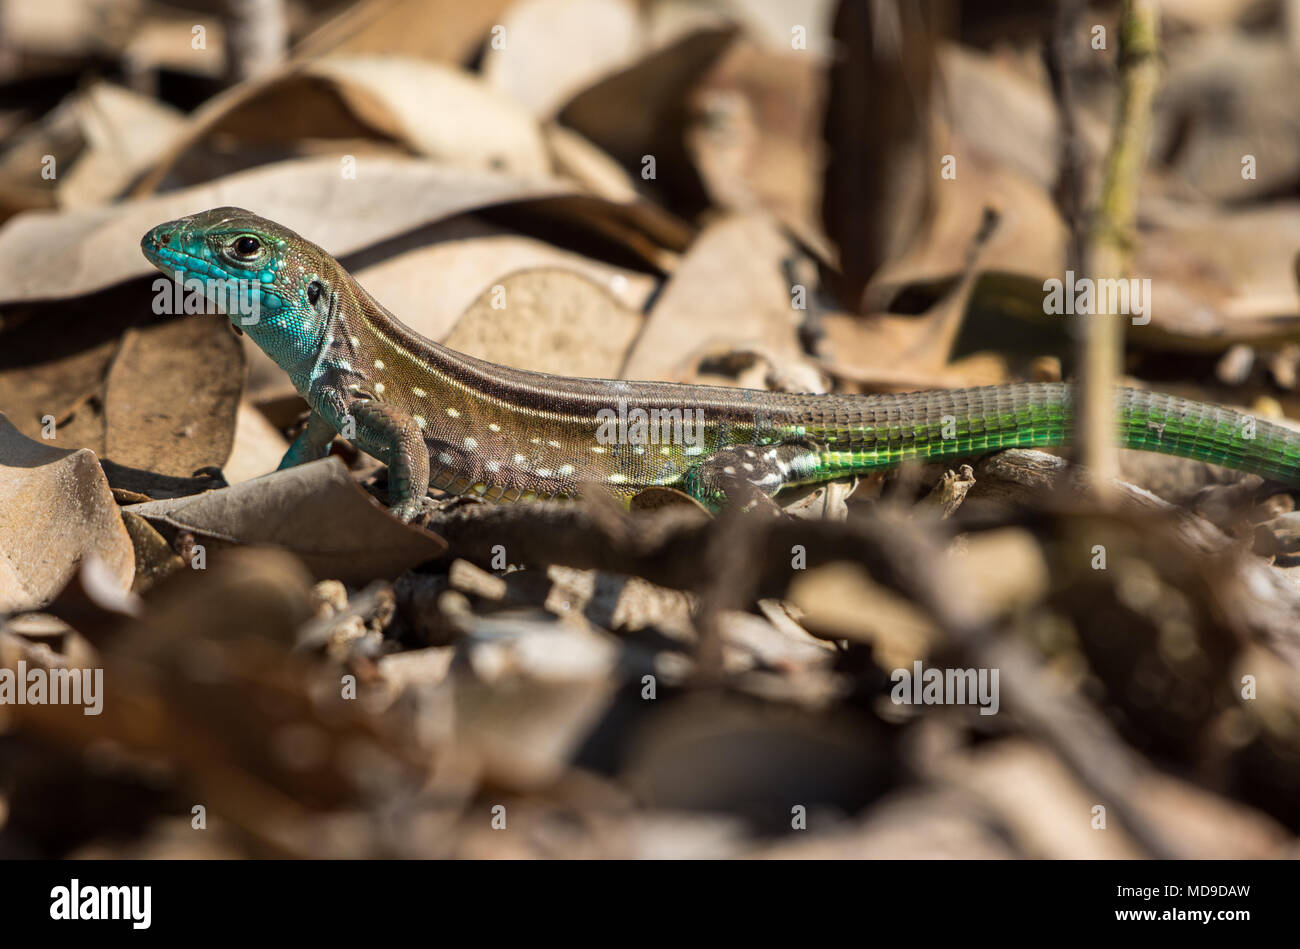 A colorful lizard. Colombia, South America. Stock Photo